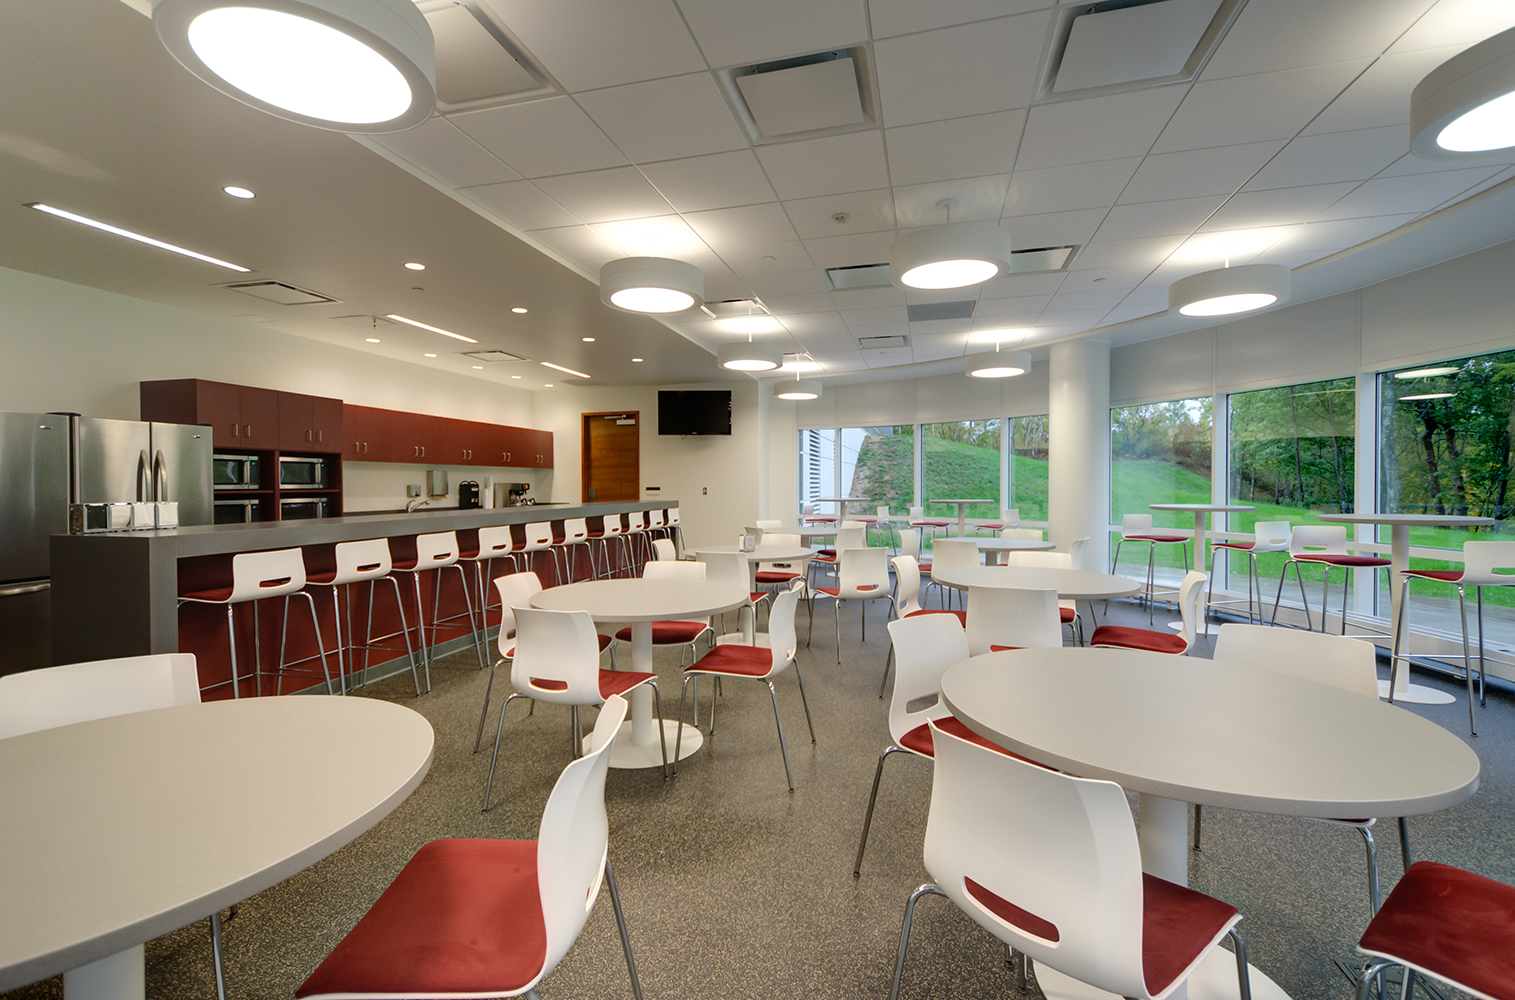 Omnience office lighting fixtures in a workplace cafeteria with round tables and large windows.